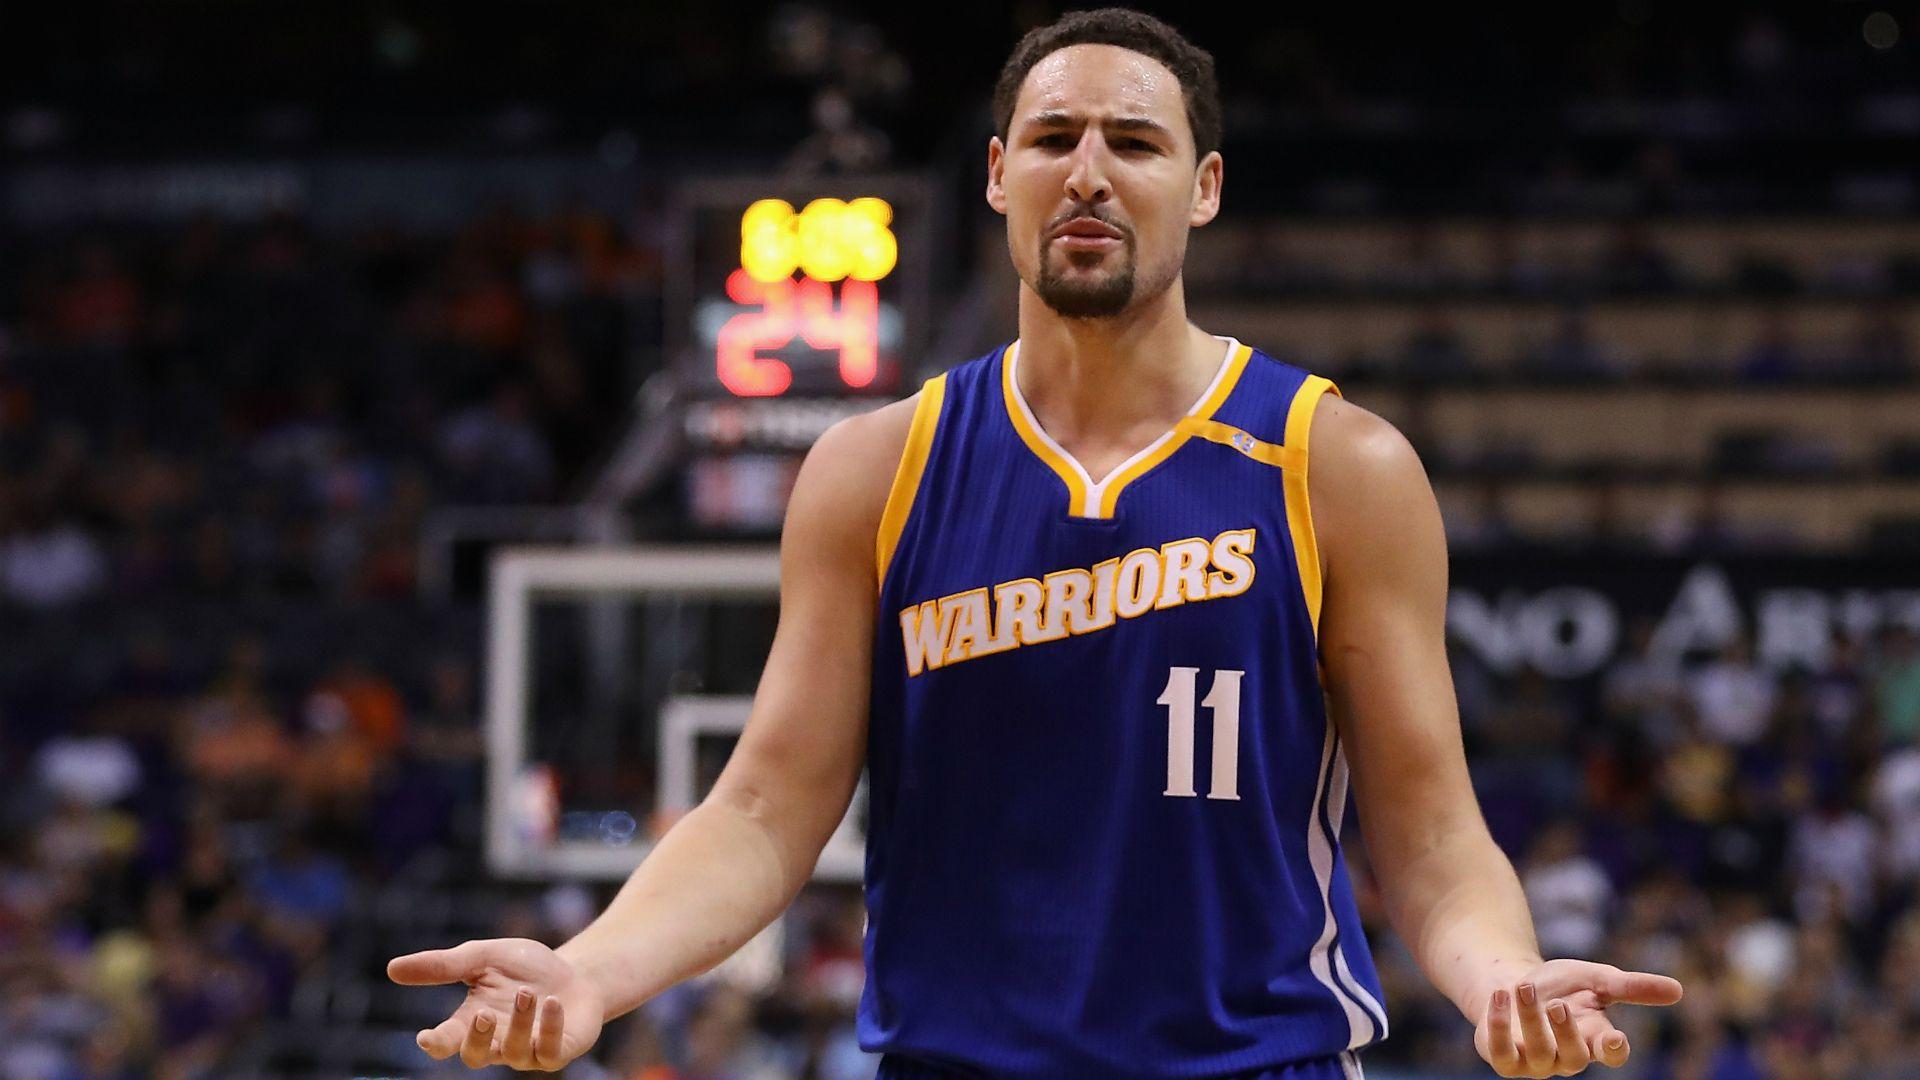 Klay Thompson continues to lead the league in catching feelings